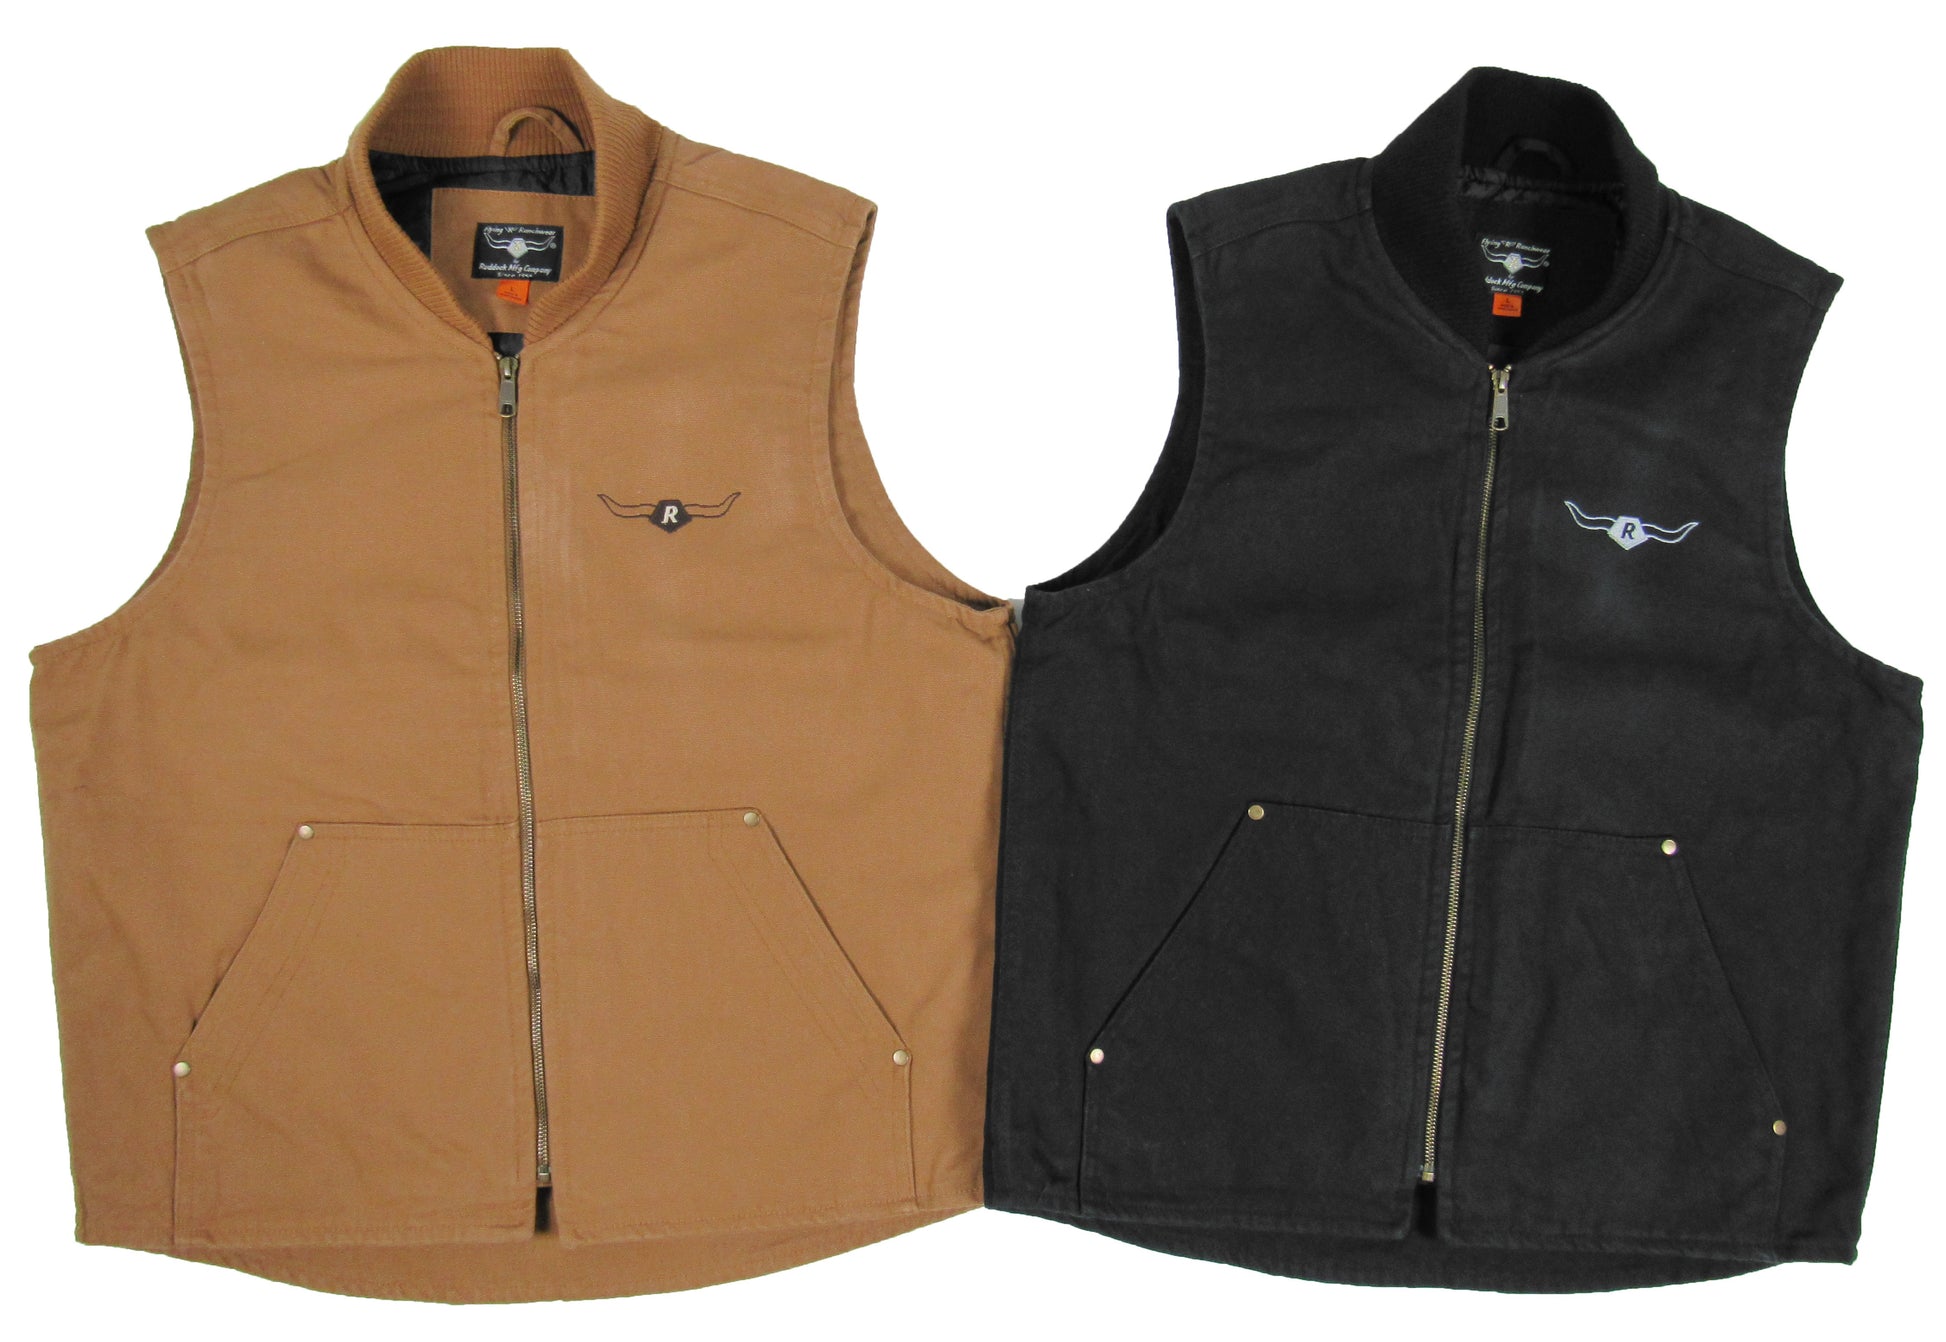 Prairie canvas vest in black and brown canvas by Flying R Ranchwear